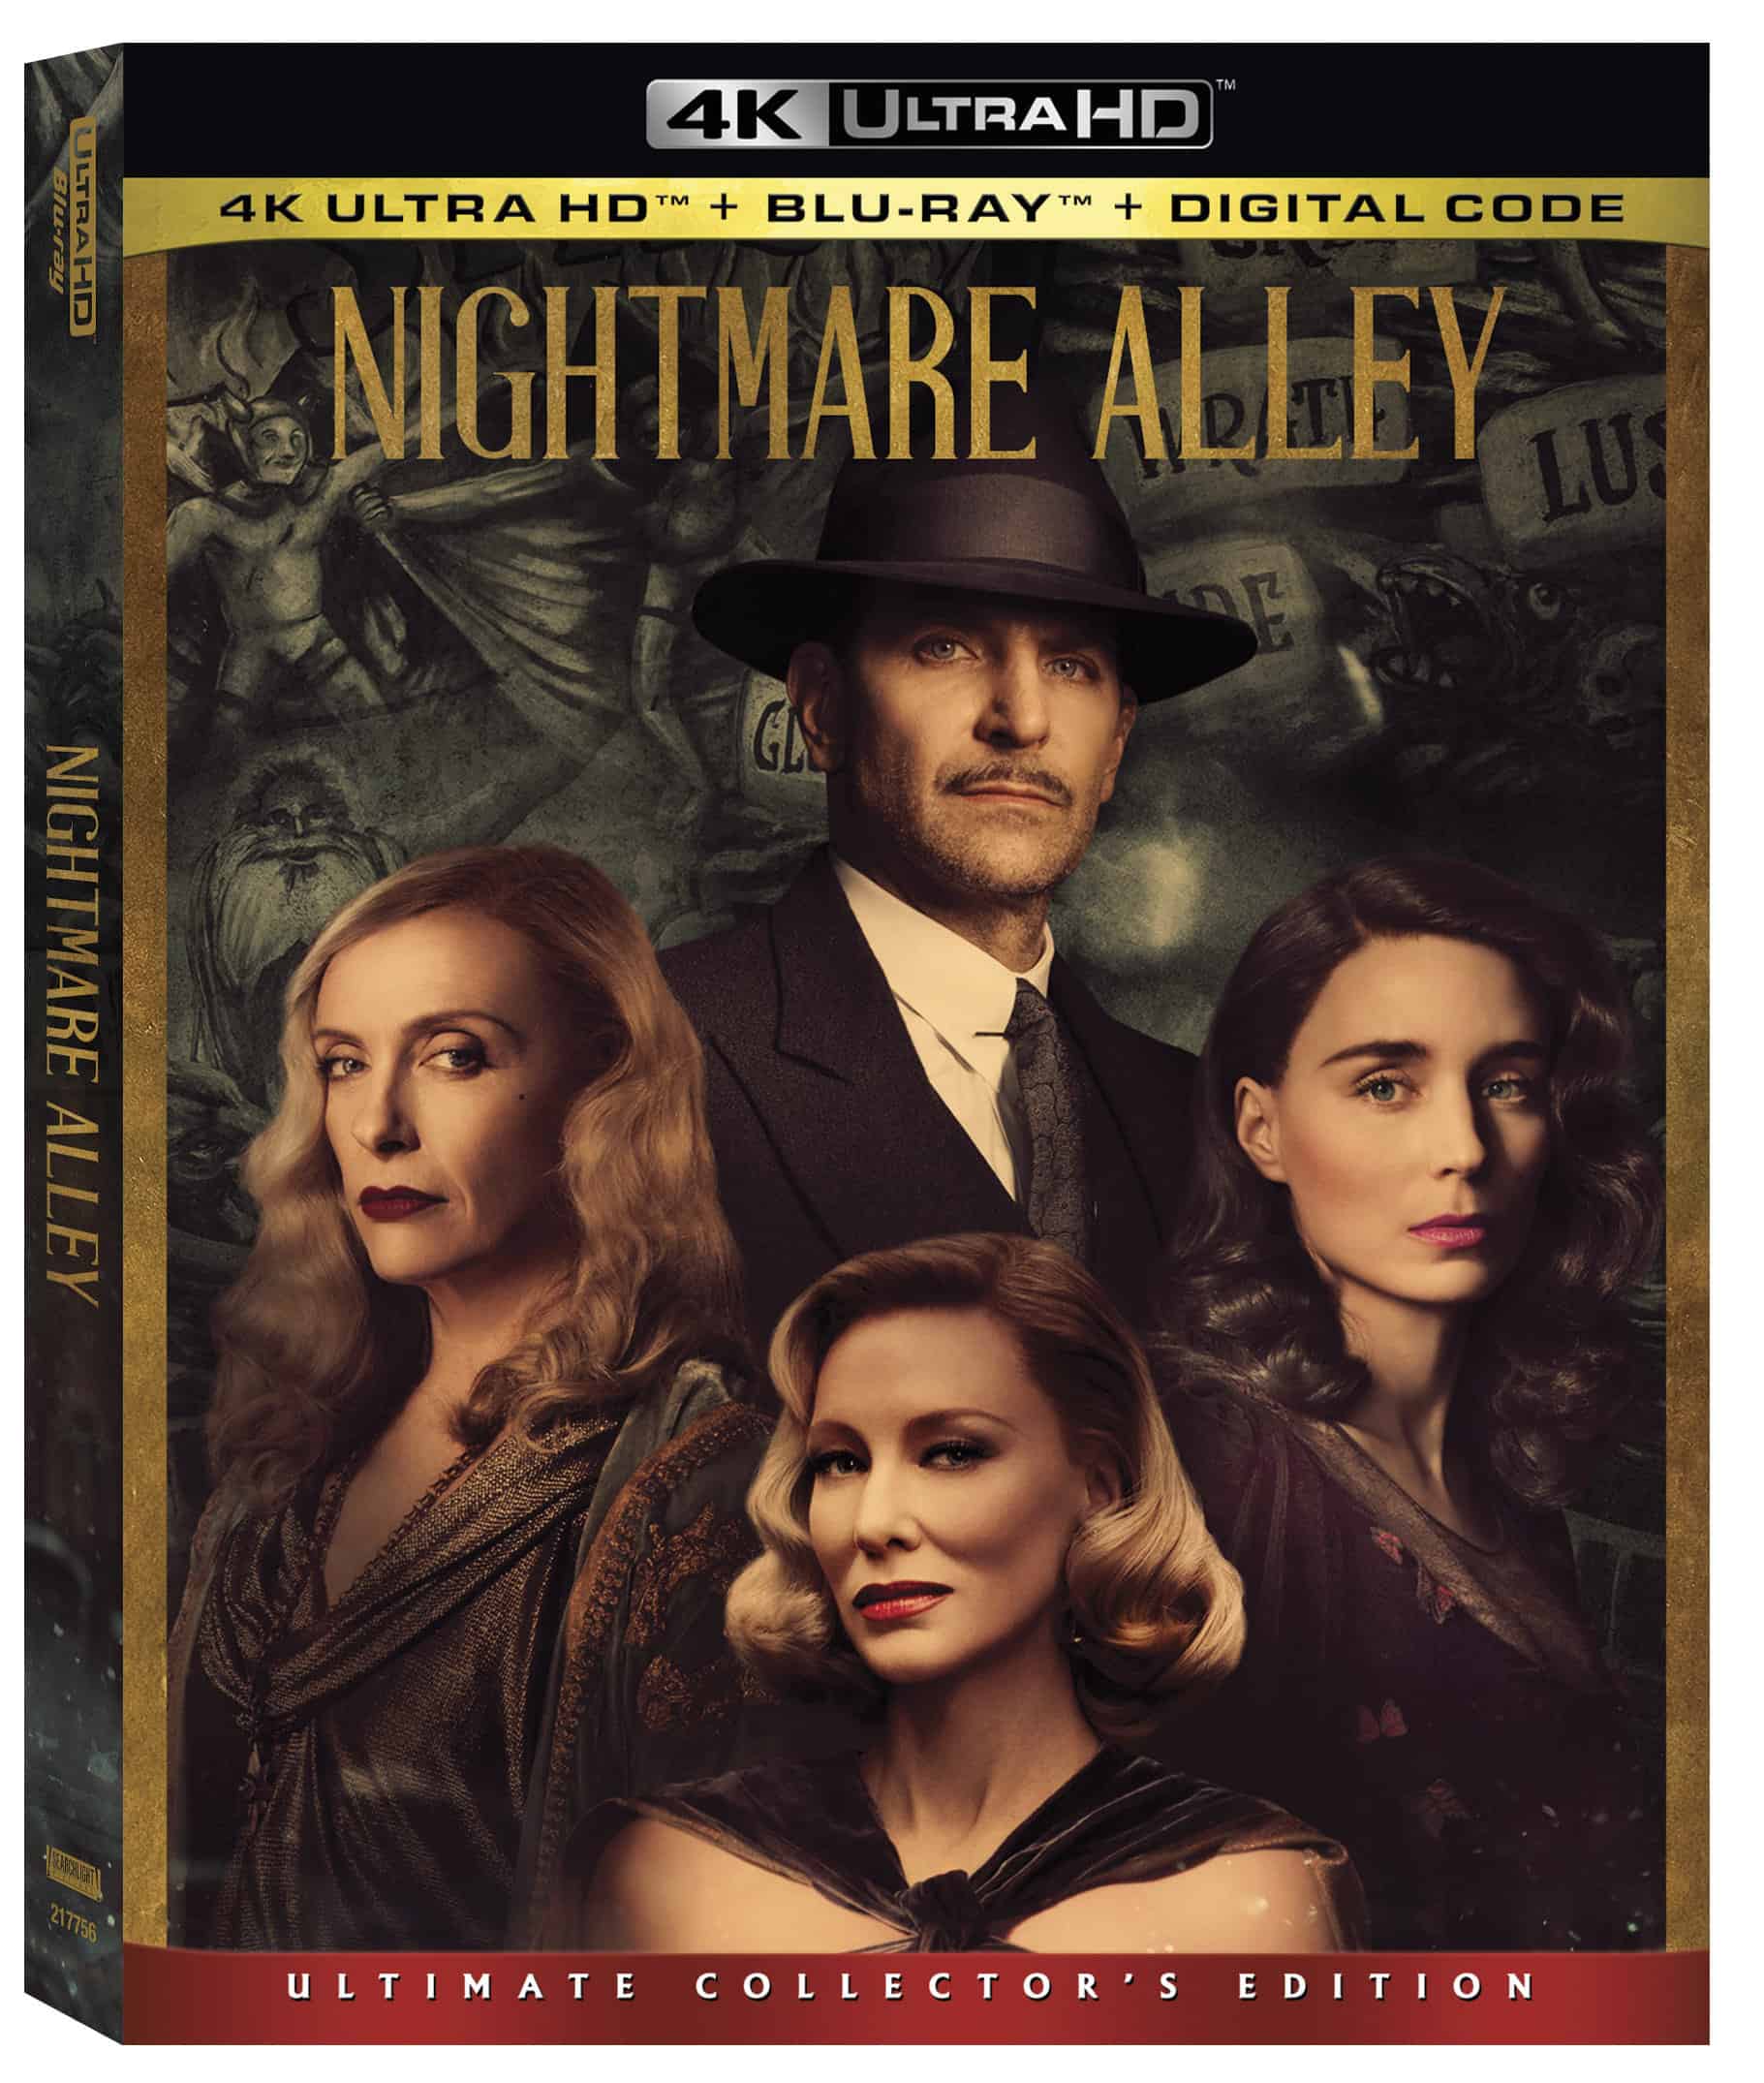 Nightmare Alley comes to Digital on March 8th and Blu-ray on March 22nd 17